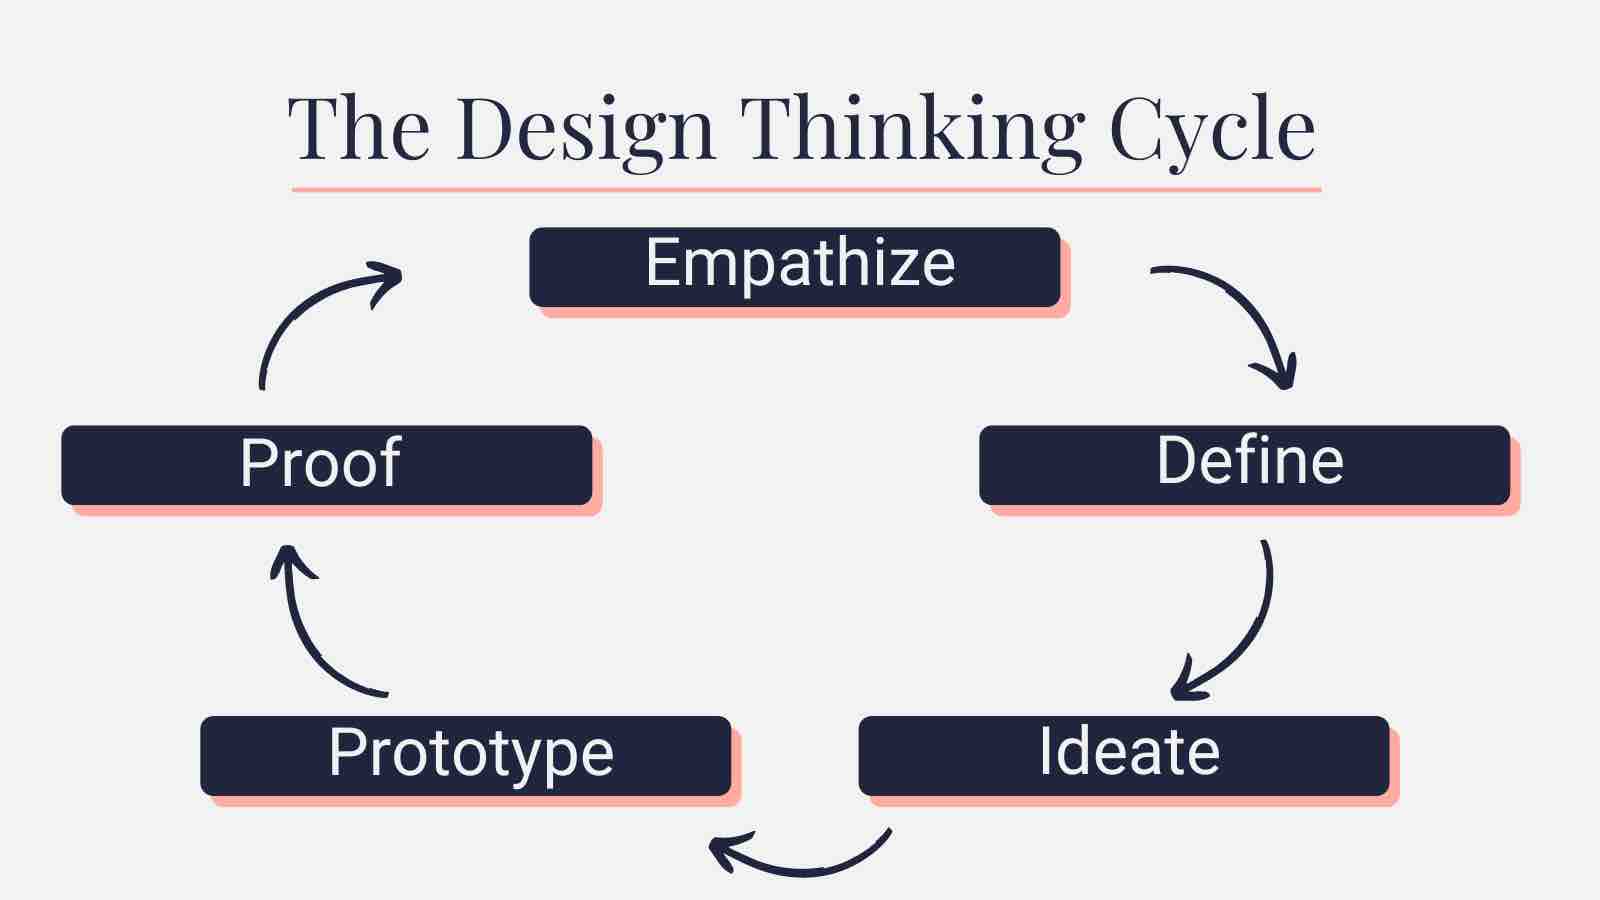 A graphic showing the process of design thinking: Empathize, Define, Ideate, Prototype, Proof